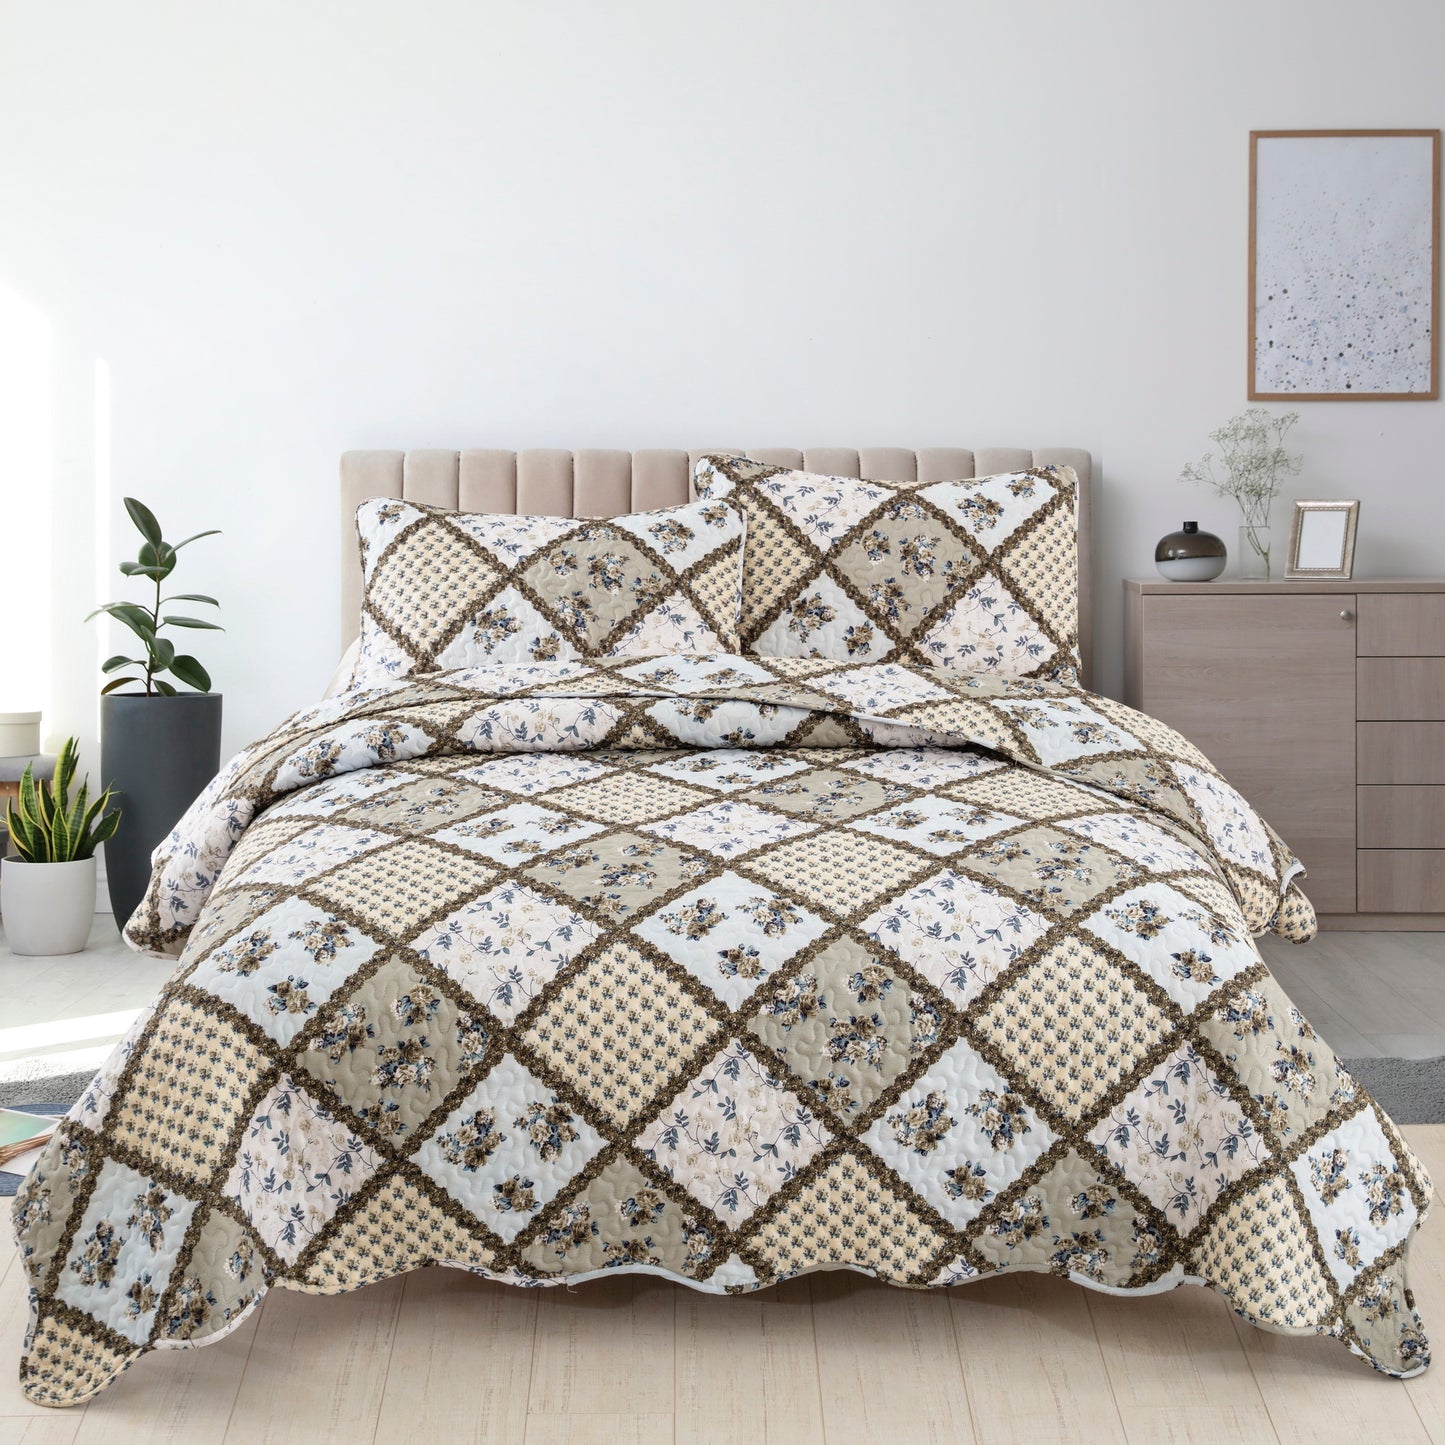 Embroidered Bohemian 3 Pieces Boho Quilt Set with 2 Pillowcases